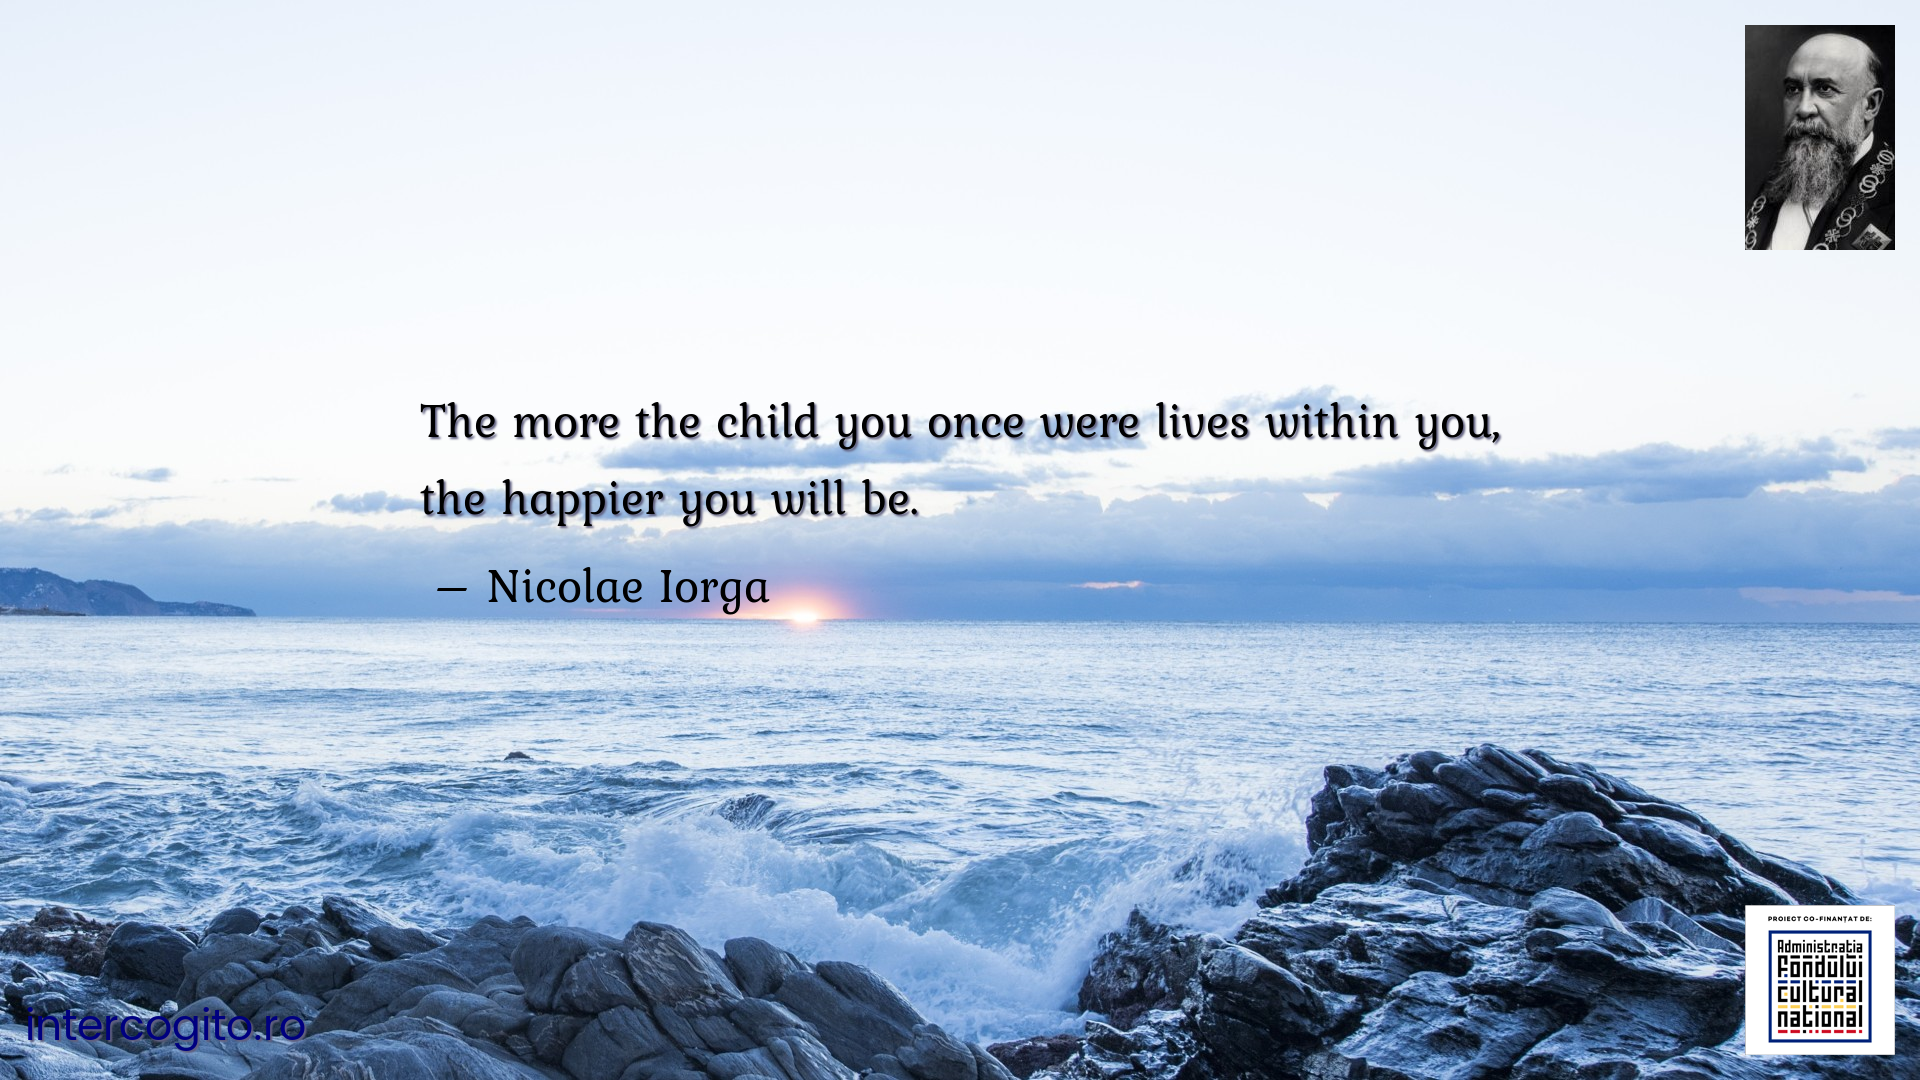 The more the child you once were lives within you, the happier you will be.